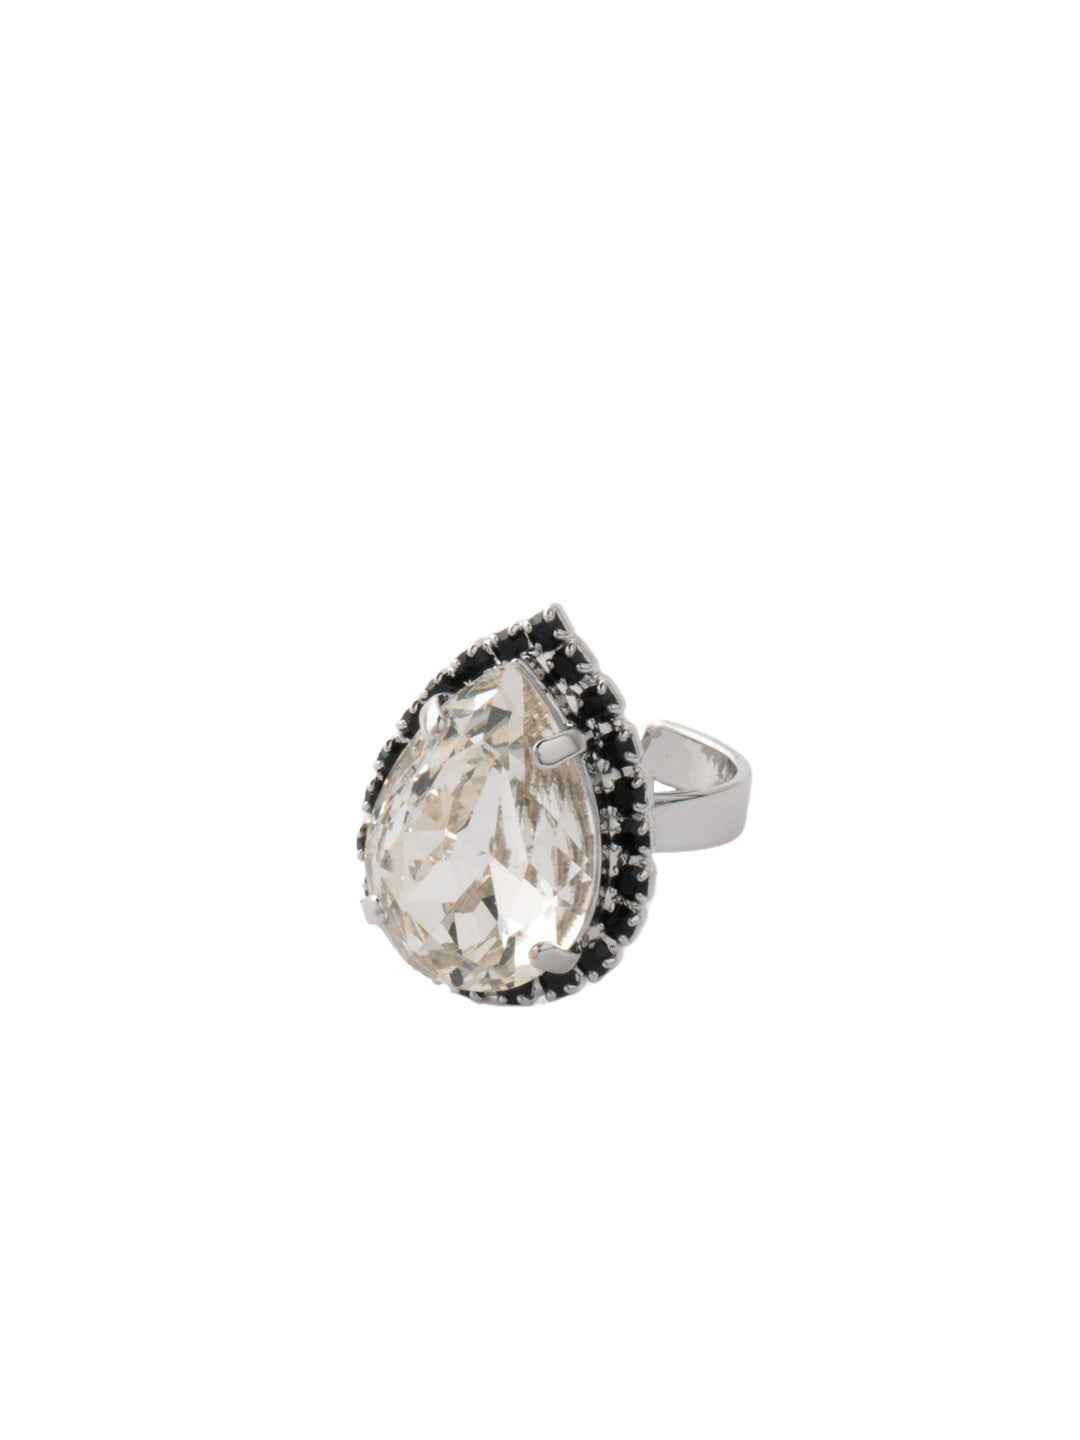 Giselle Pear Cocktail Ring - RFC80PDSNI - <p>The Giselle Pear Cocktail Ring features a halo pear cut crystal on an adjustable band. From Sorrelli's Starry Night collection in our Palladium finish.</p>